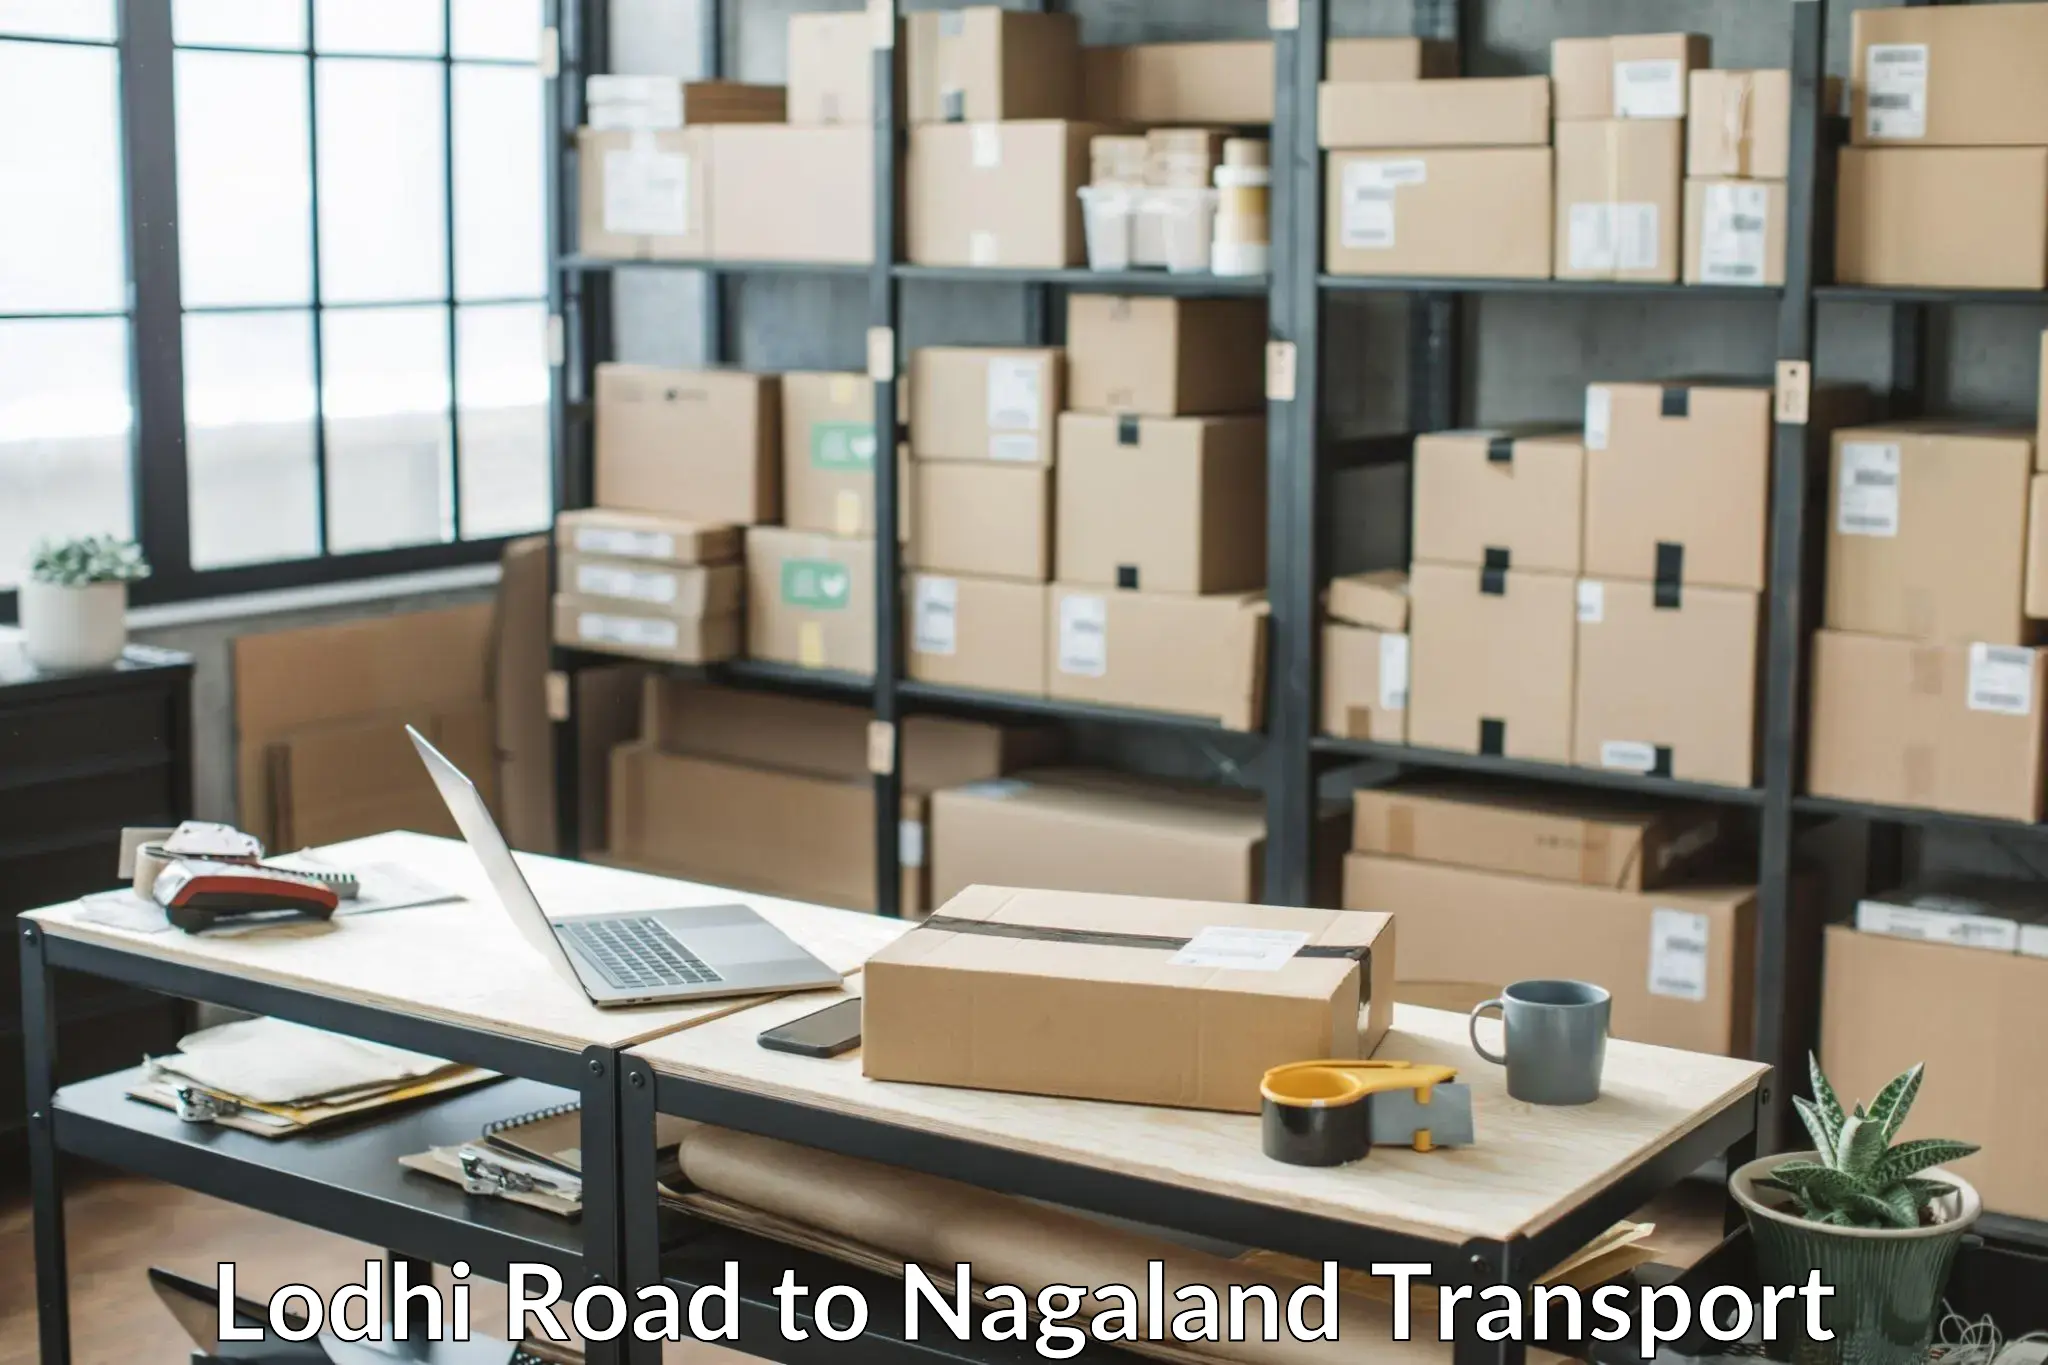 Delivery service Lodhi Road to Nagaland